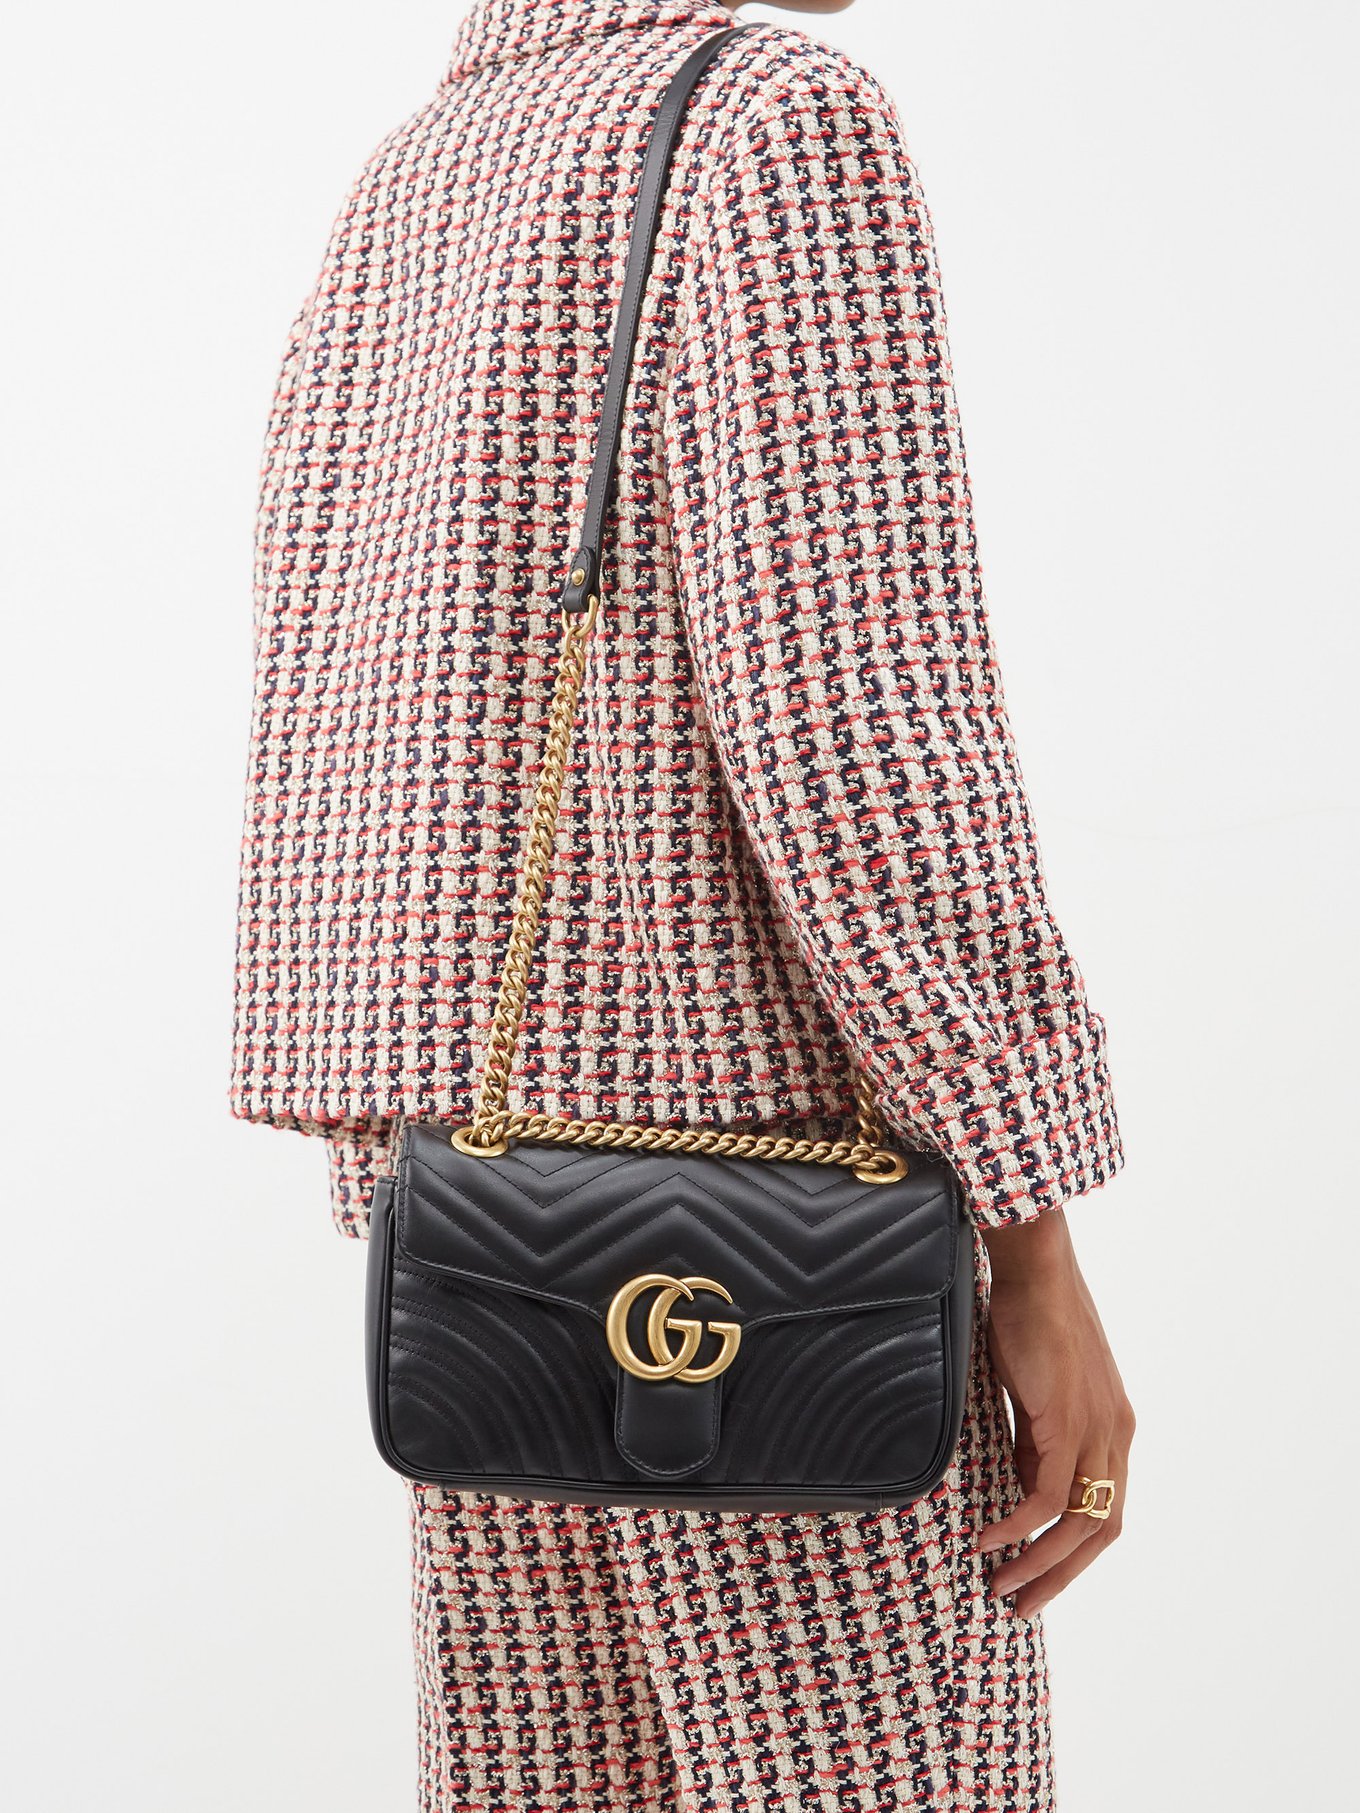 Gucci - GG Marmont Small Quilted Leather Shoulder Bag - Black